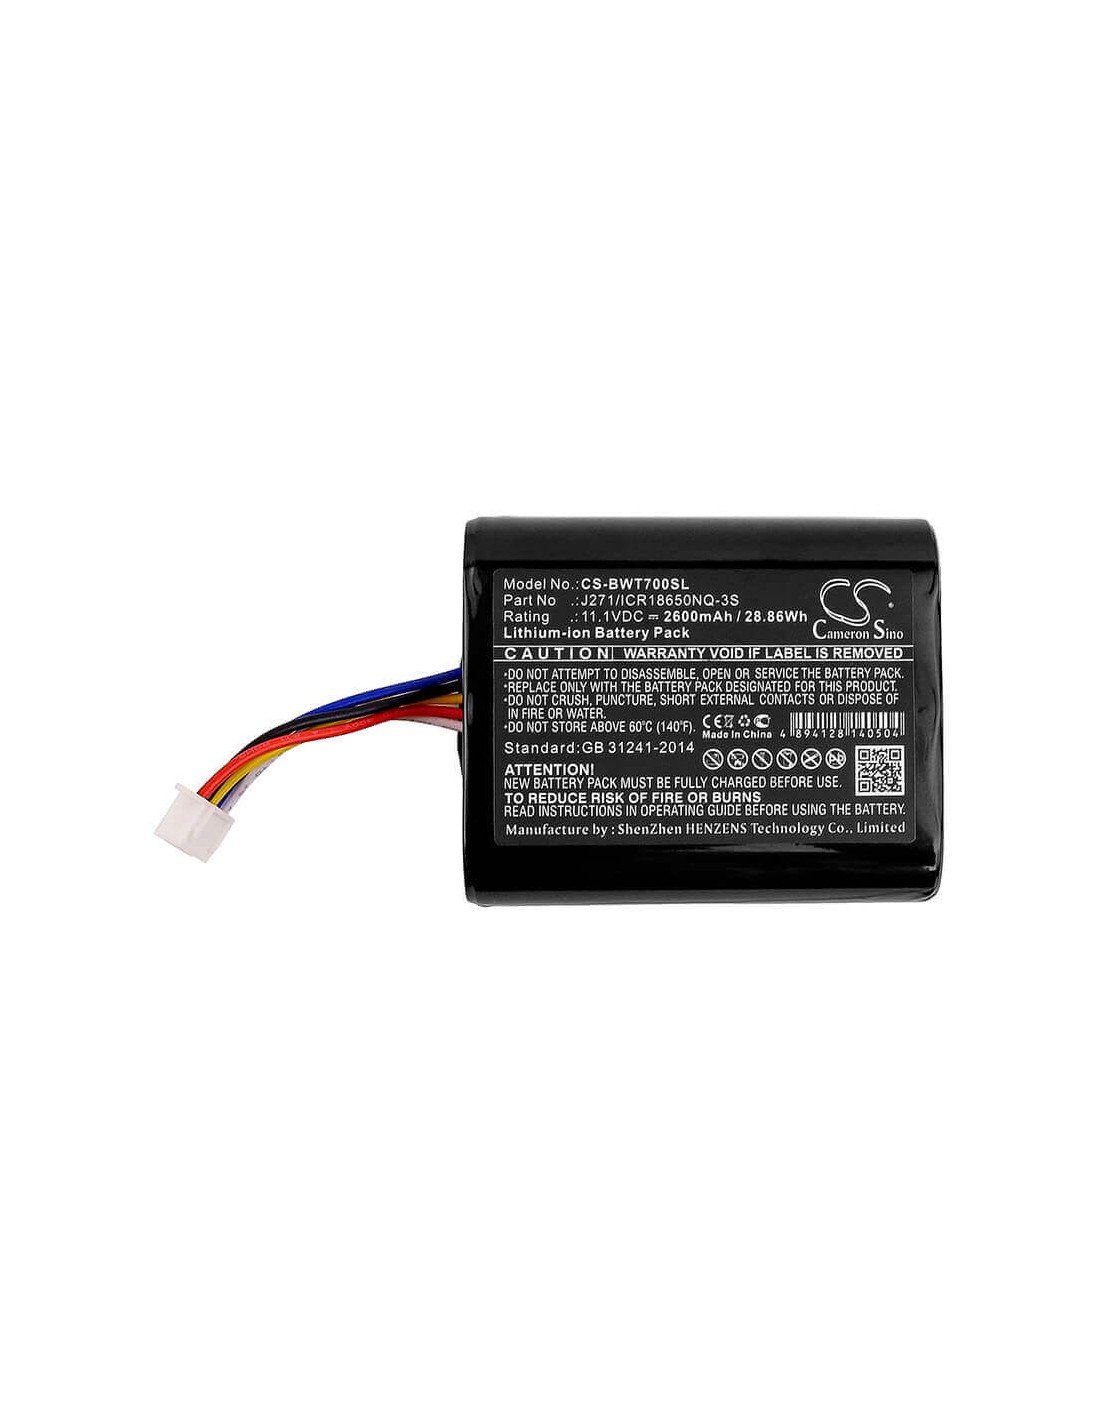 Battery for Bowers & Wilkins, T7 11.1V, 2600mAh - 28.86Wh